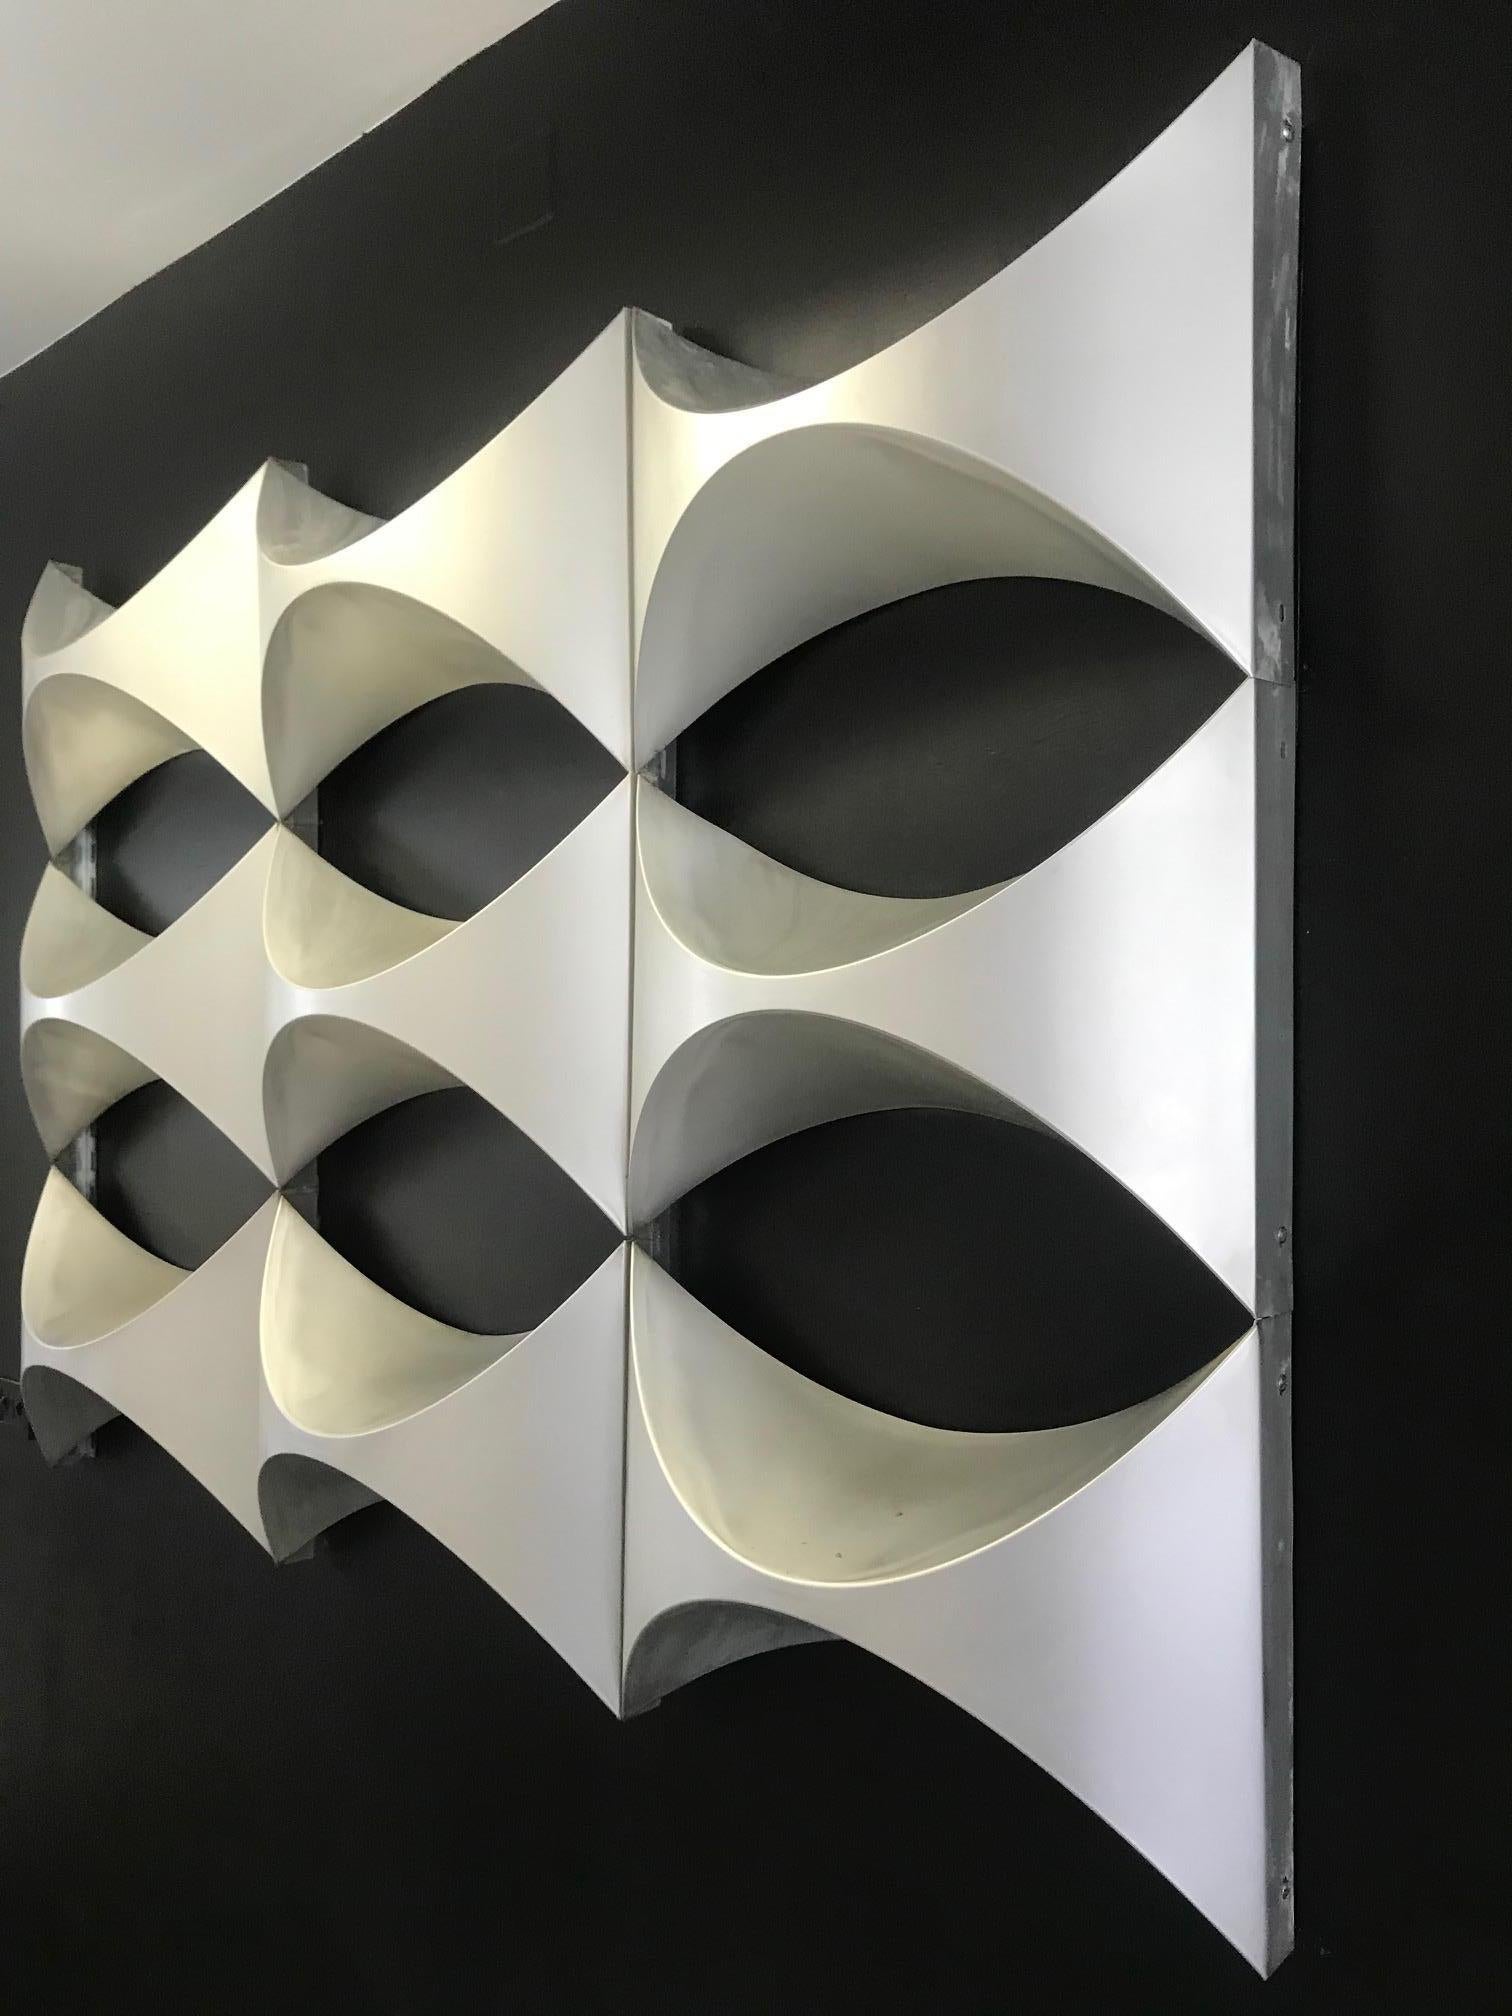 Decorative wall panel, element of French architecture, 1970. This panel is made up of 9 polished aluminum modules. They come from a building facade.

The study center egg was created in 1962, passage Du Guesclin in Paris. It is a multidisciplinary